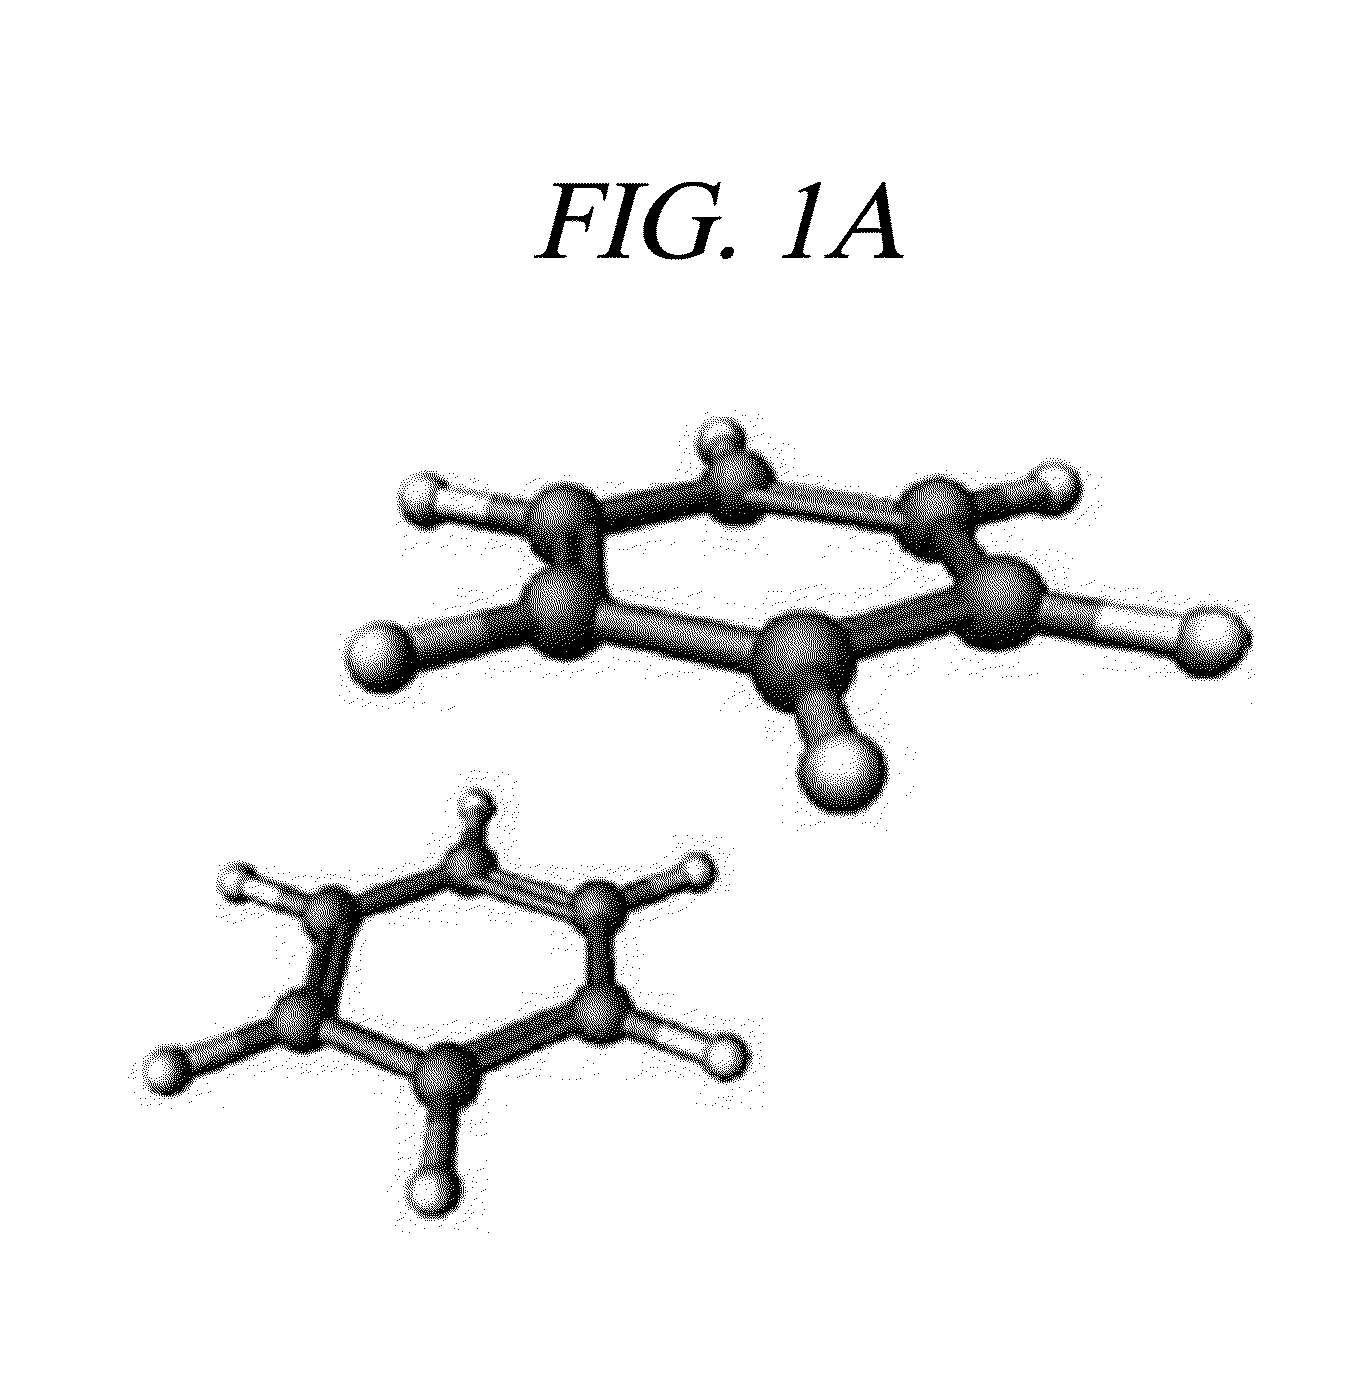 Method of predicting protein-ligand docking structure based on quantum mechanical scoring